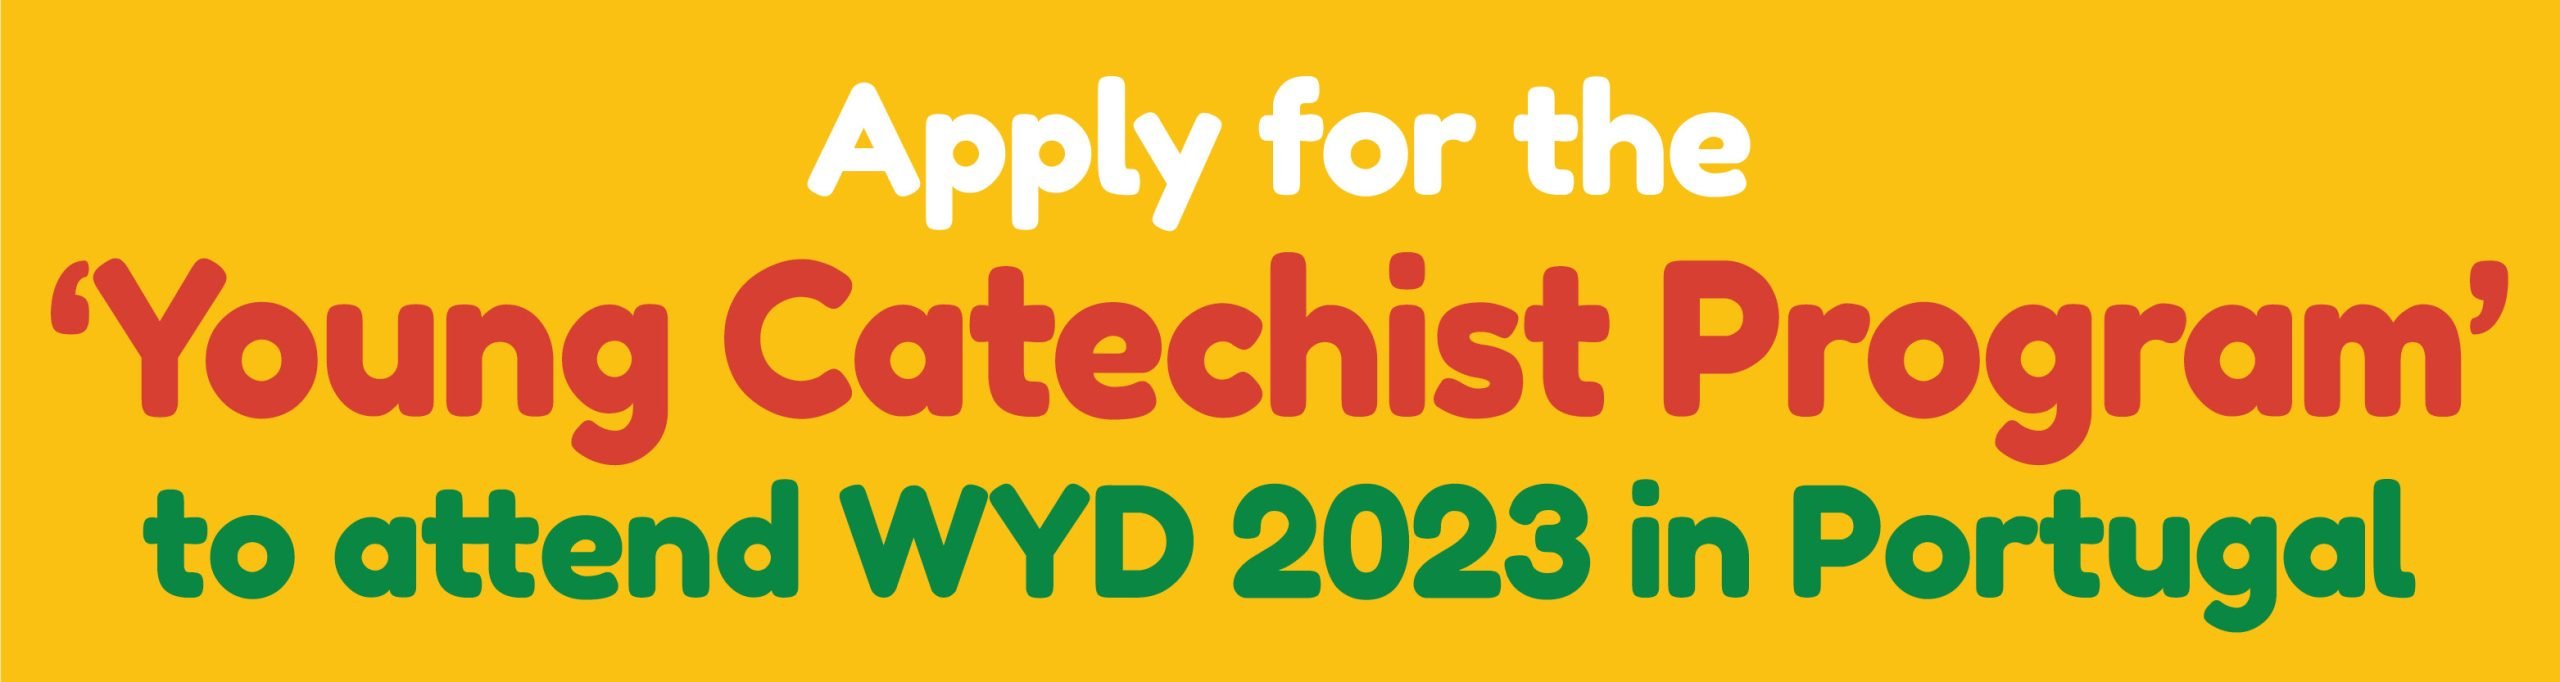 Apply for the Young Catechist Program to attend WYD 2023 in Portugal